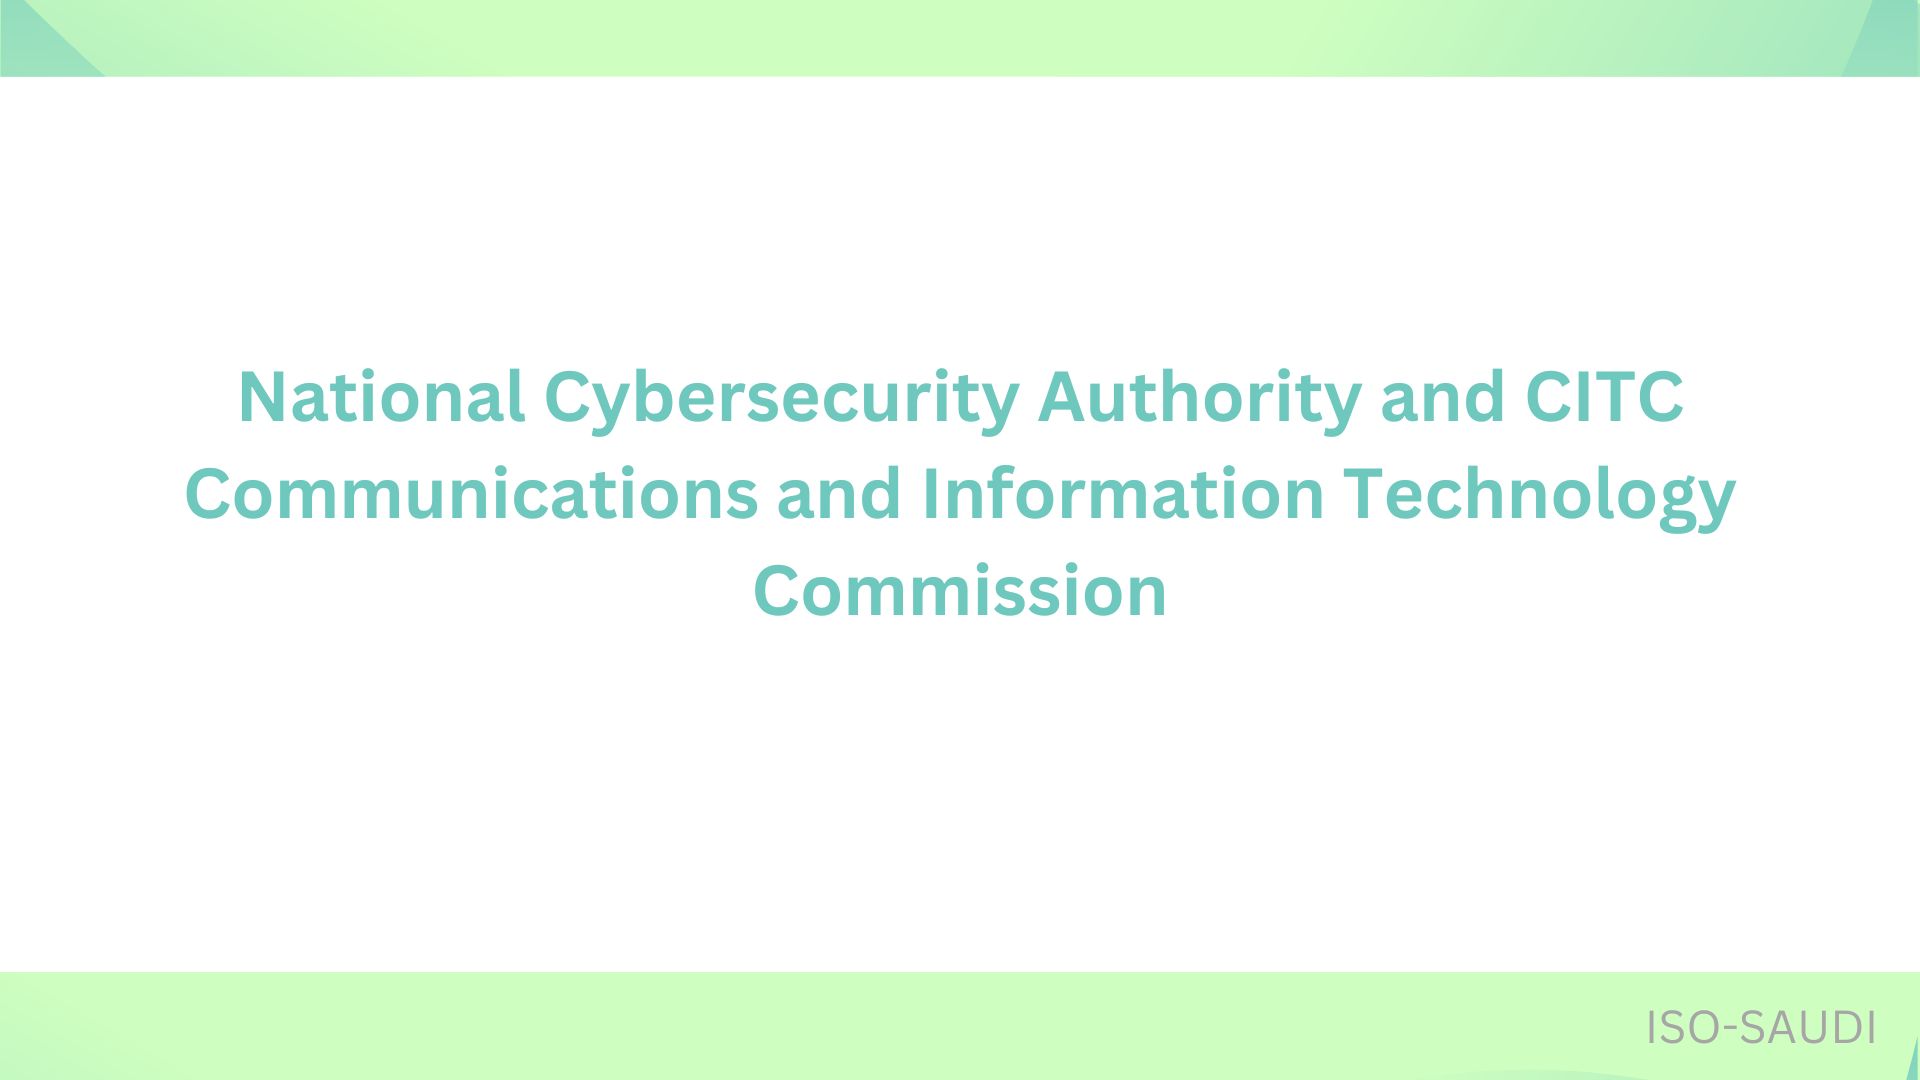 National Cybersecurity Authority and CITC Communications and Information Technology Commission